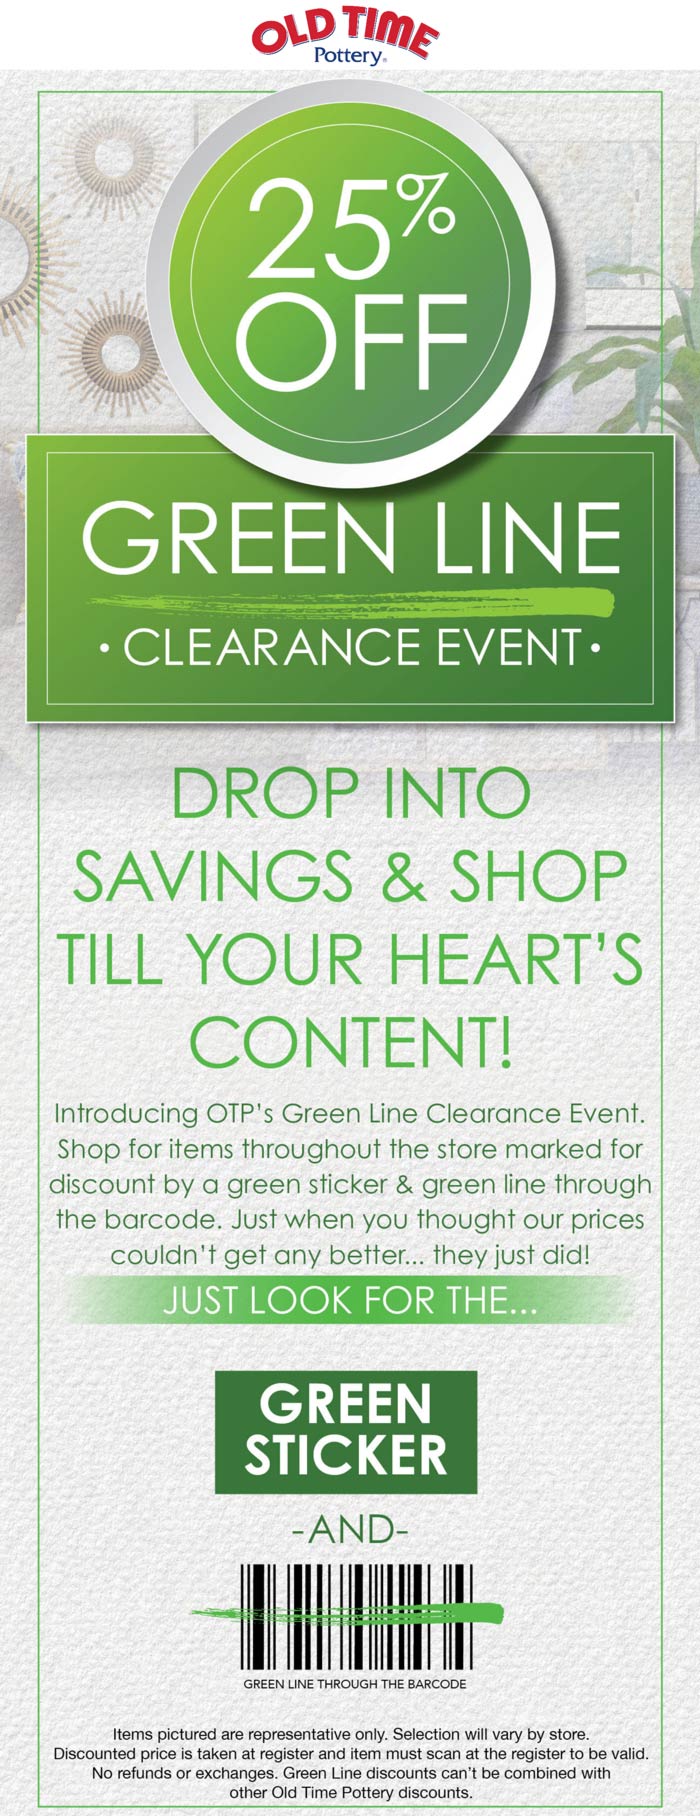 Old Time Pottery stores Coupon  25% off green line clearance at Old Time Pottery #oldtimepottery 